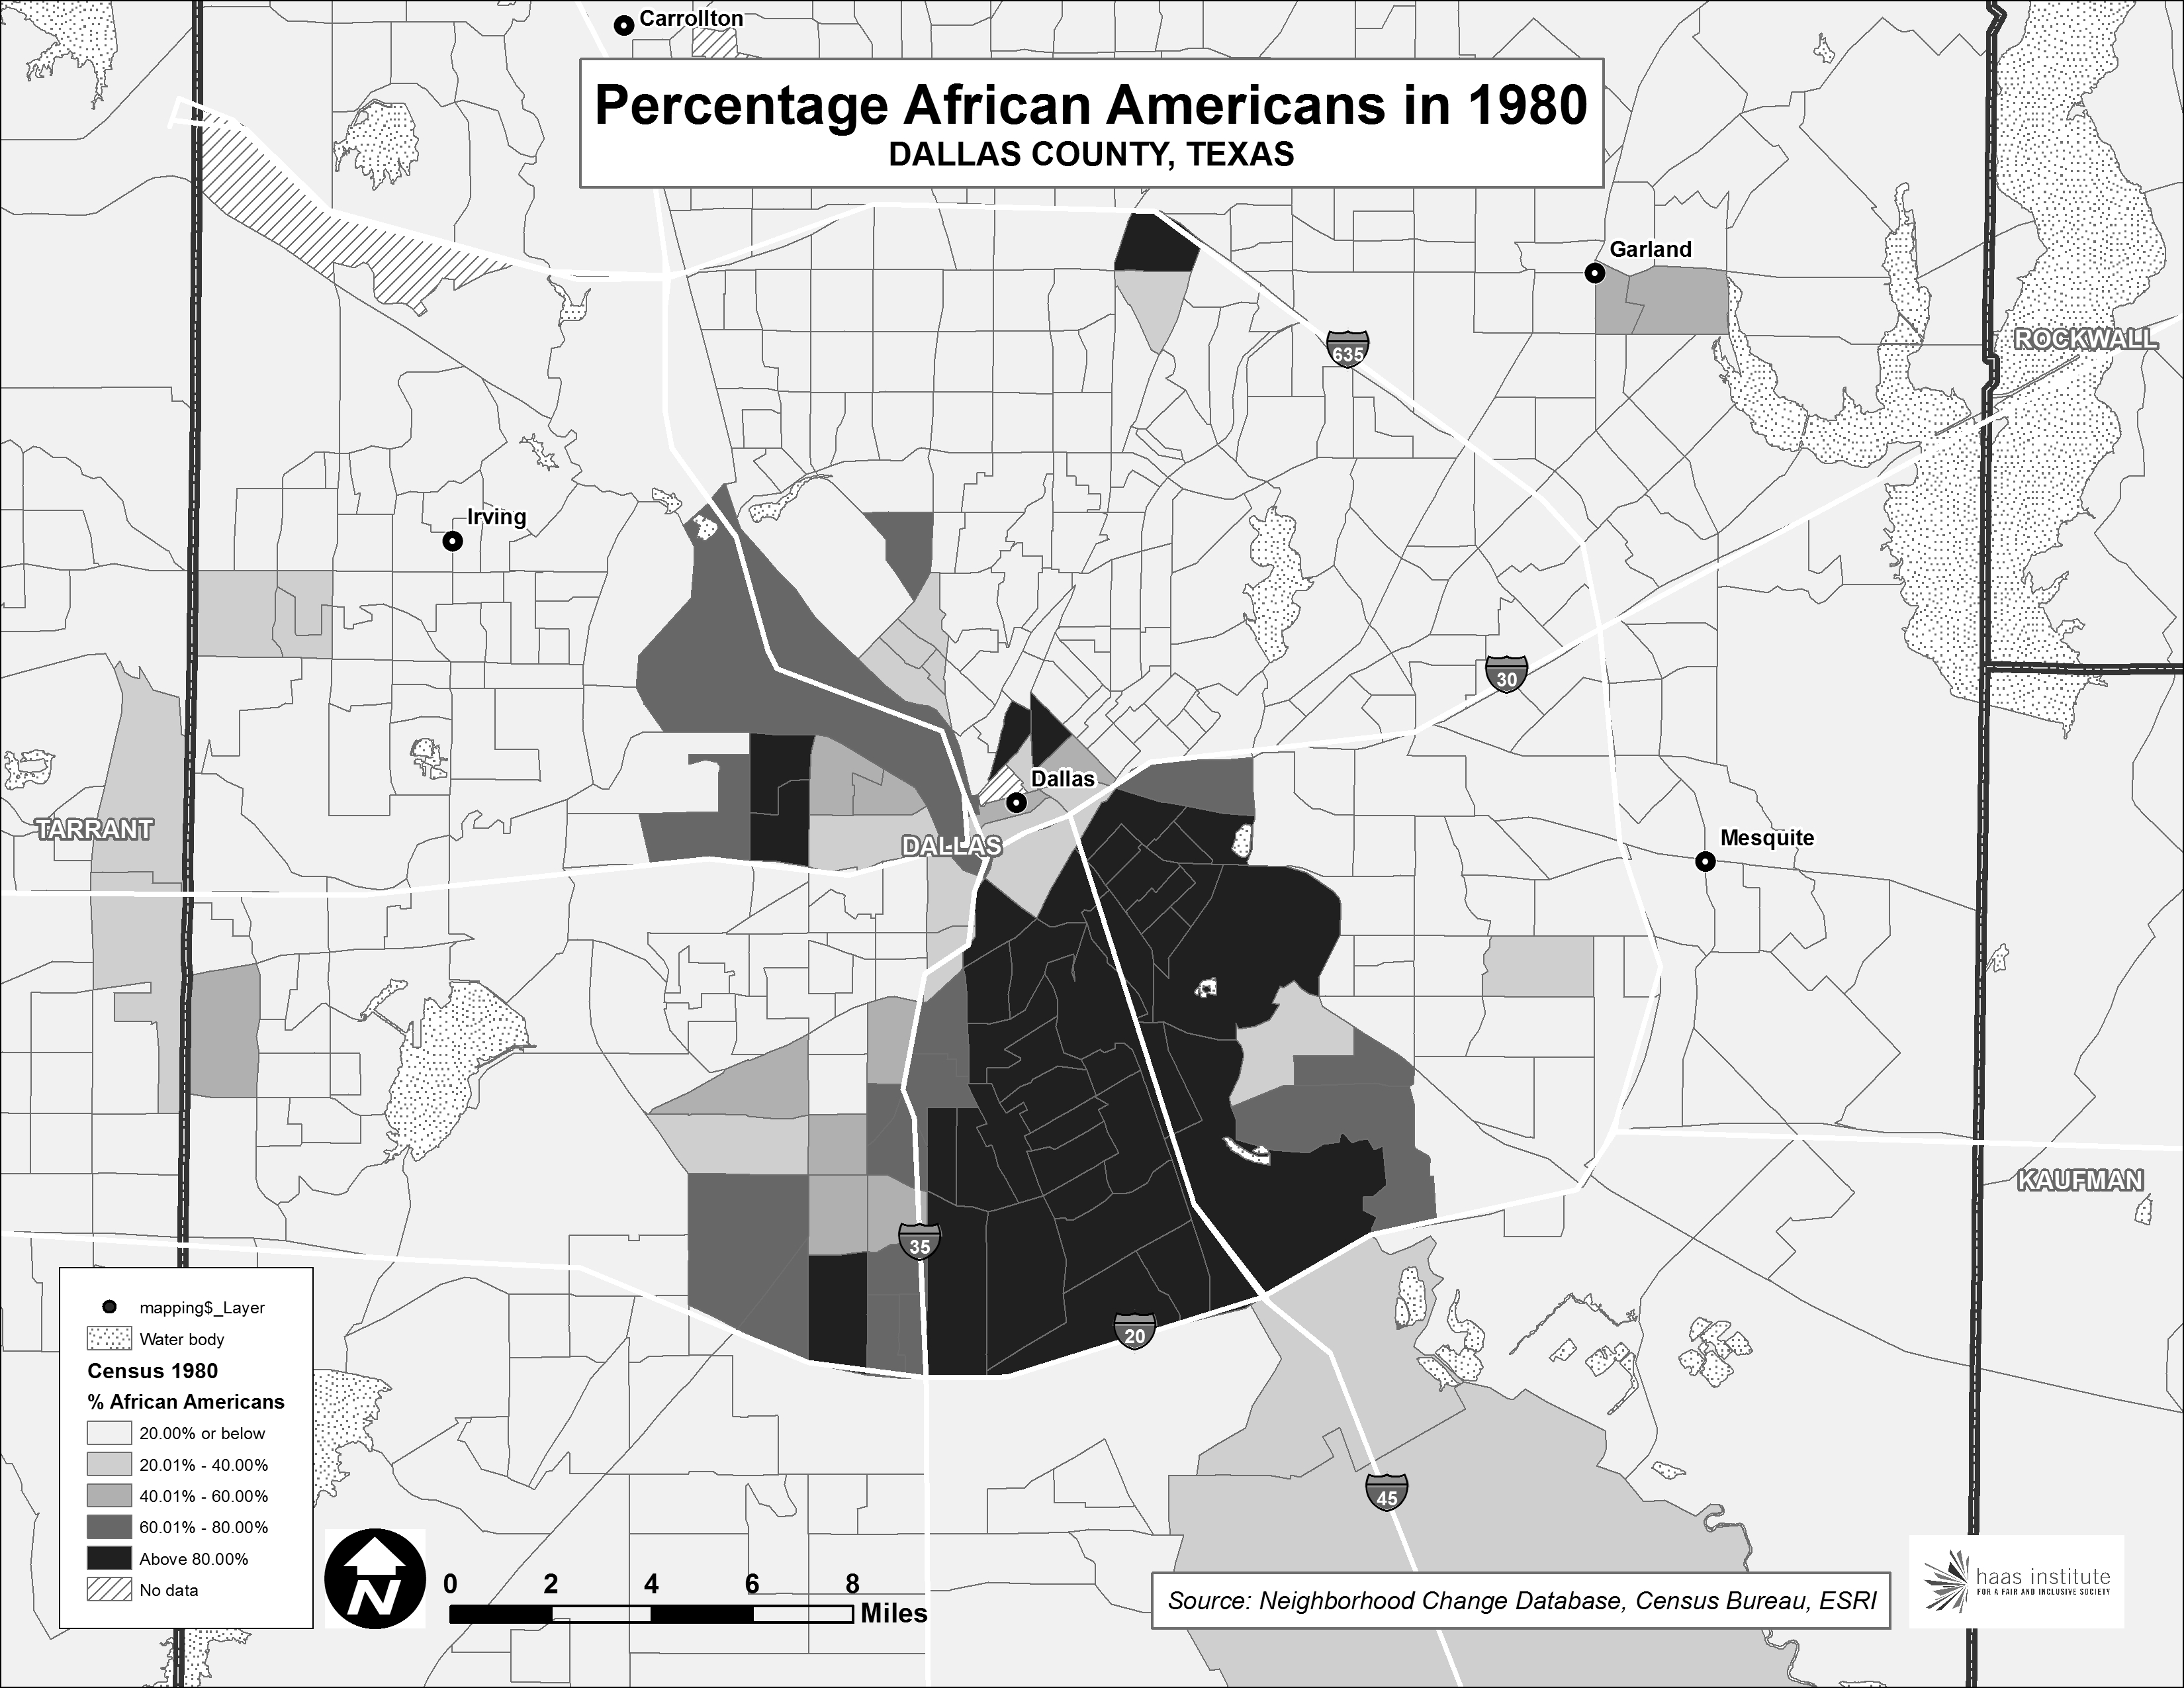 The percentage of African Americans, by census tract, in Dallas County, in 1980. 